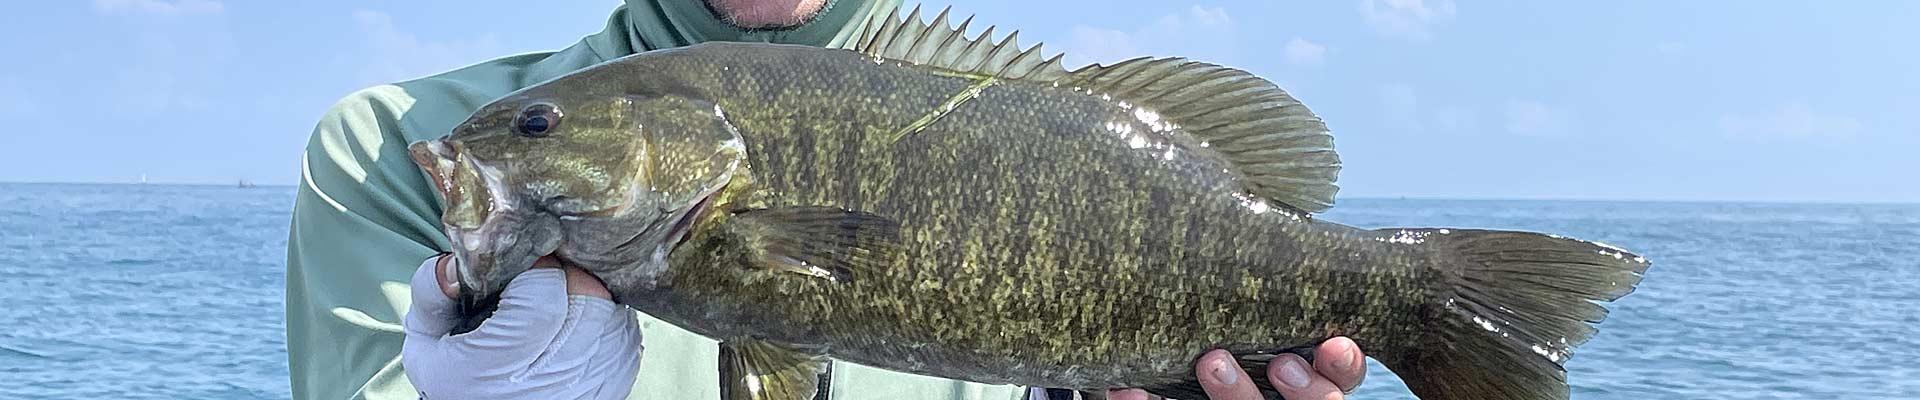 A Guide to Fishing Lake St. Clair  The Ultimate Bass Fishing Resource  Guide® LLC